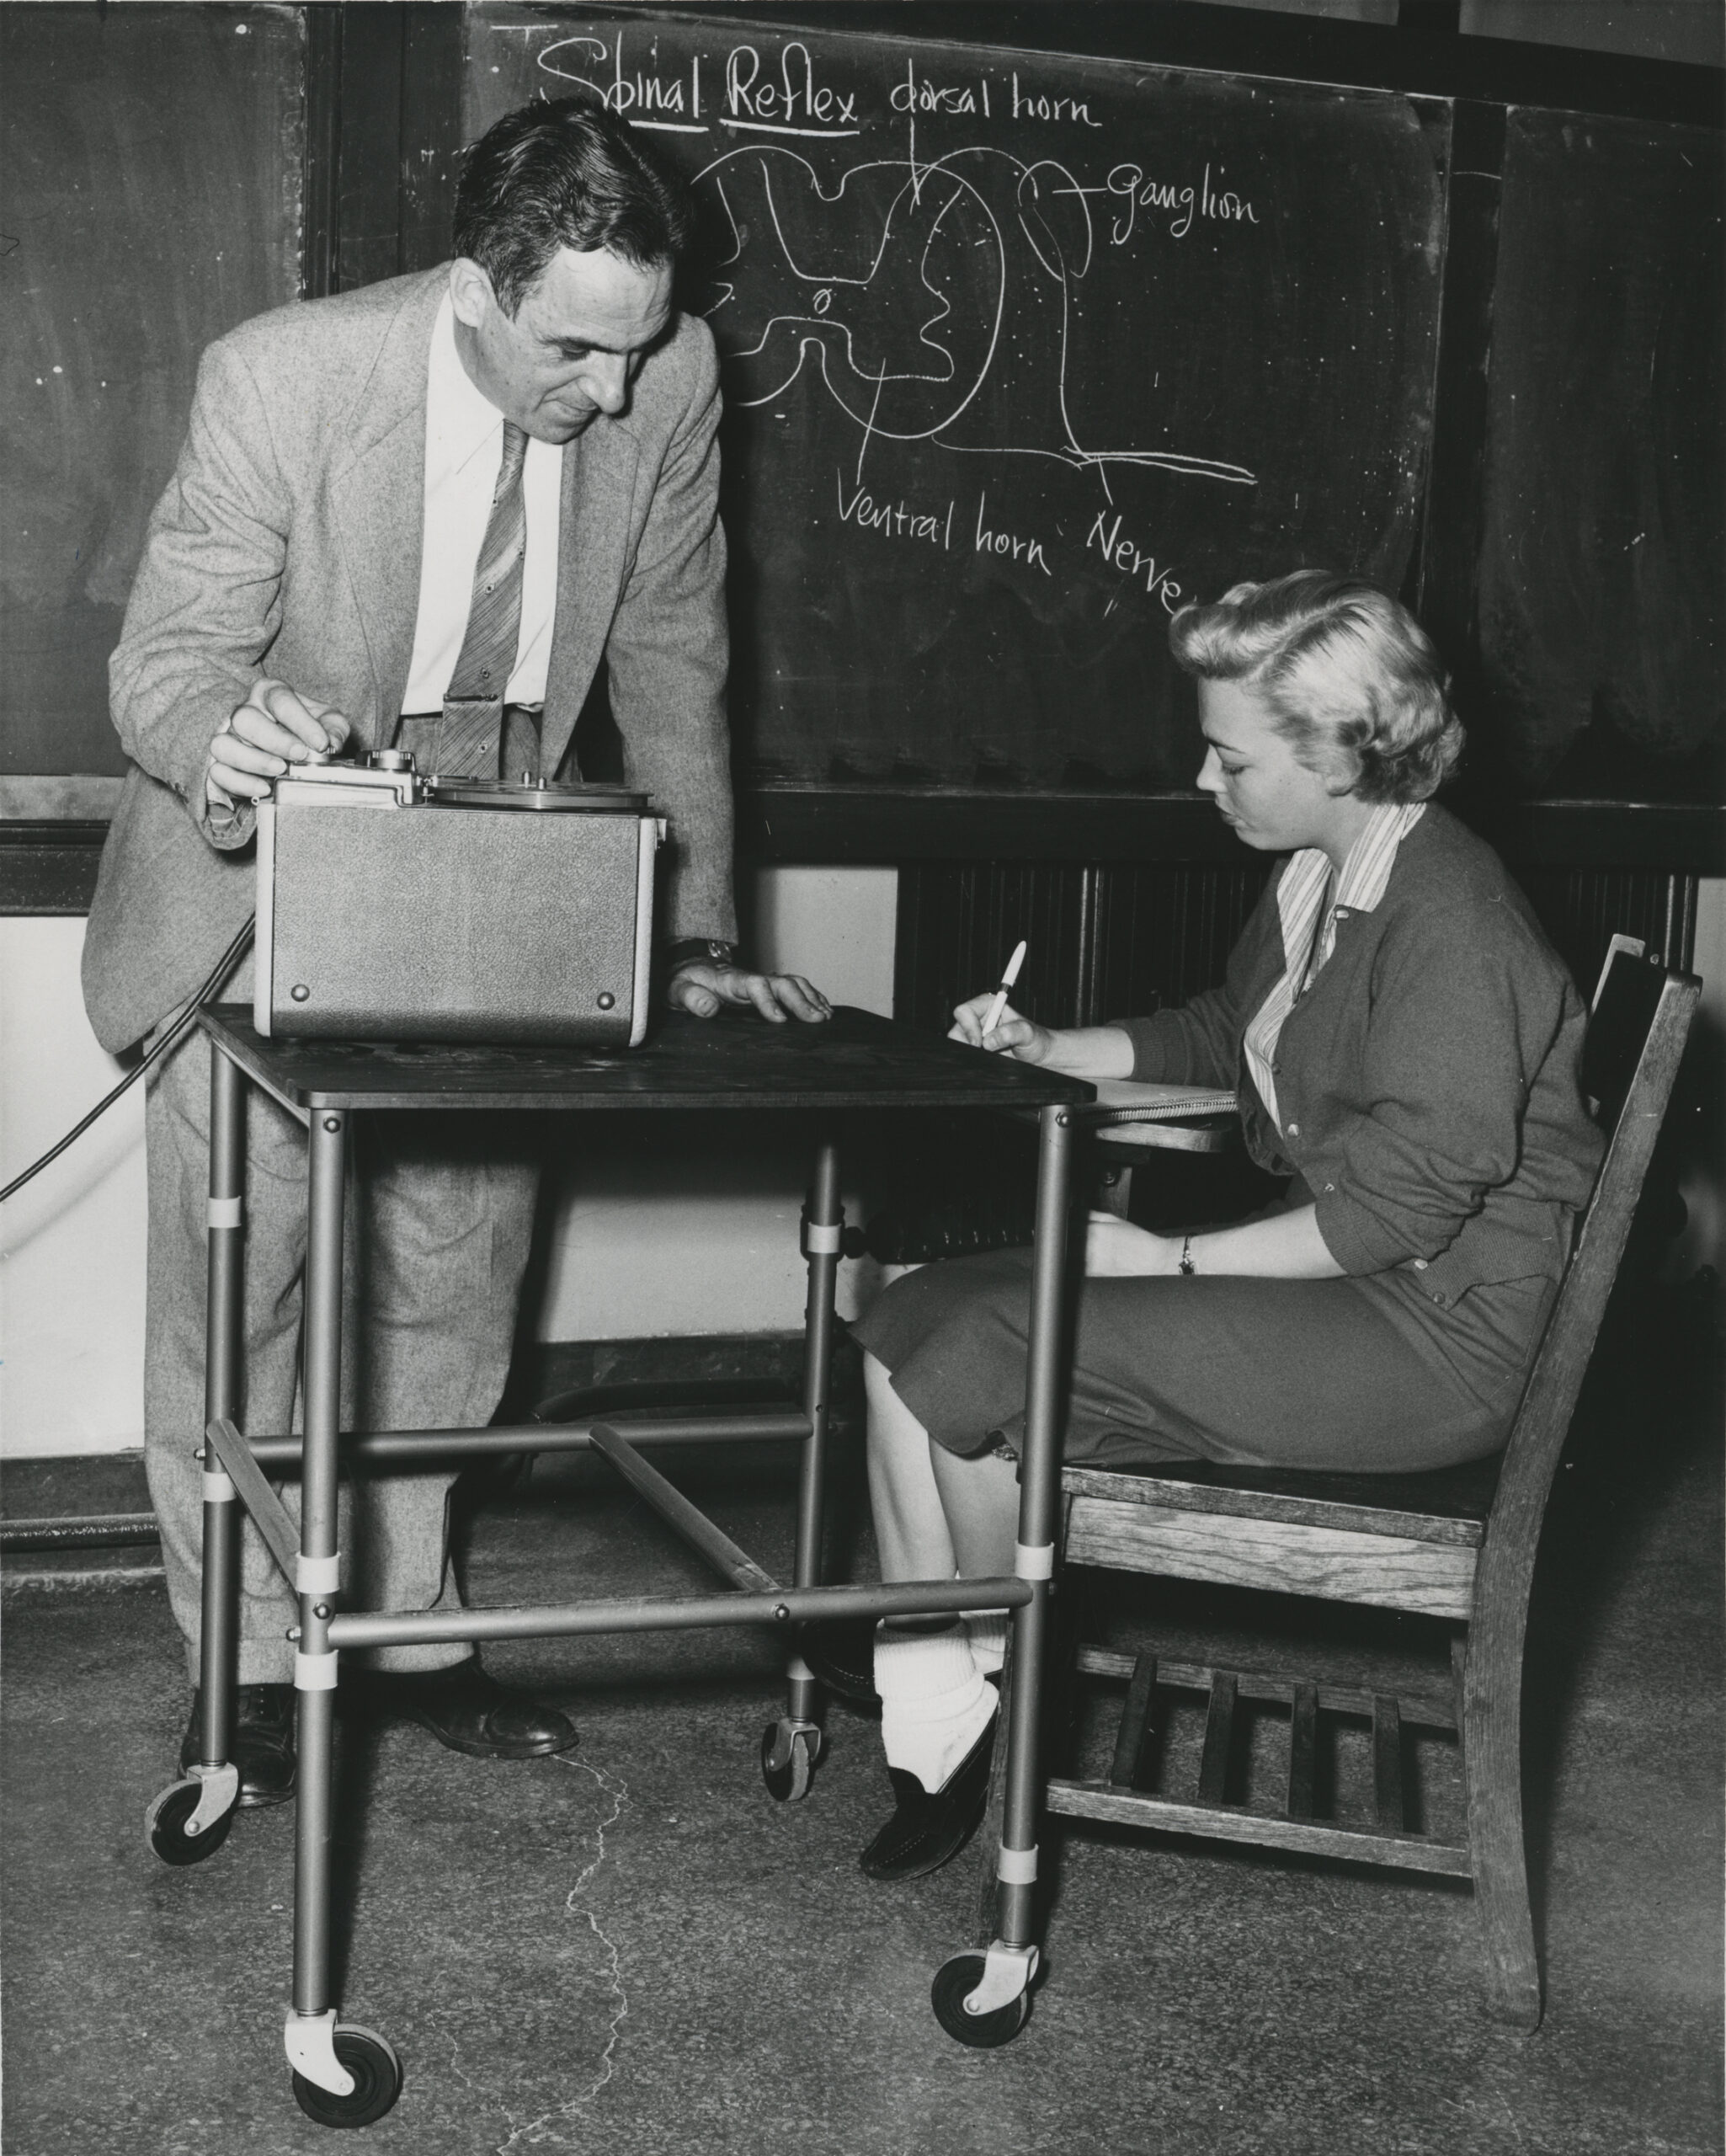 Claude in a suit and tie with a chalkboard behind him helping a student